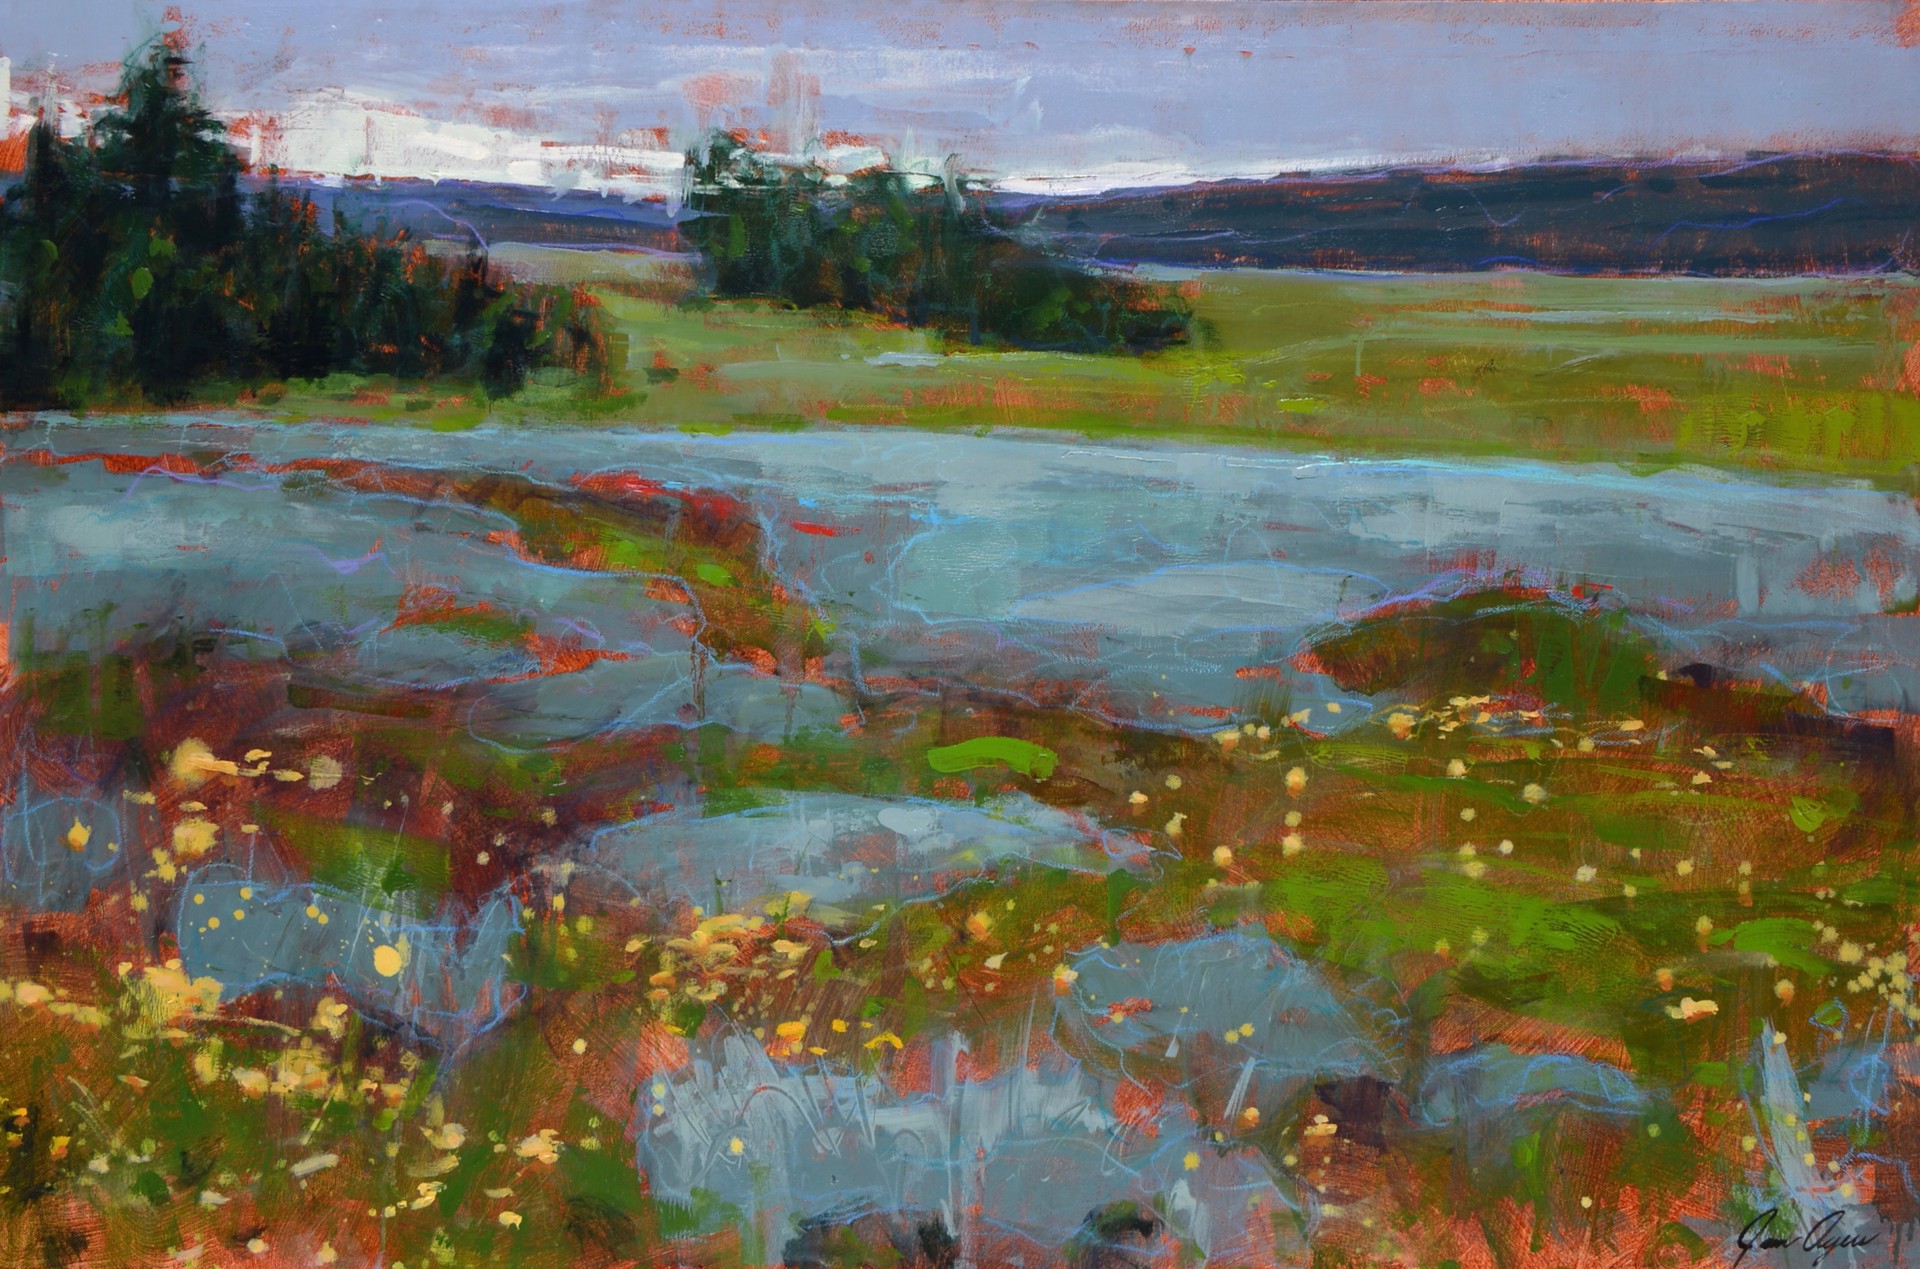 Dripping Into Flowers by James Ayers